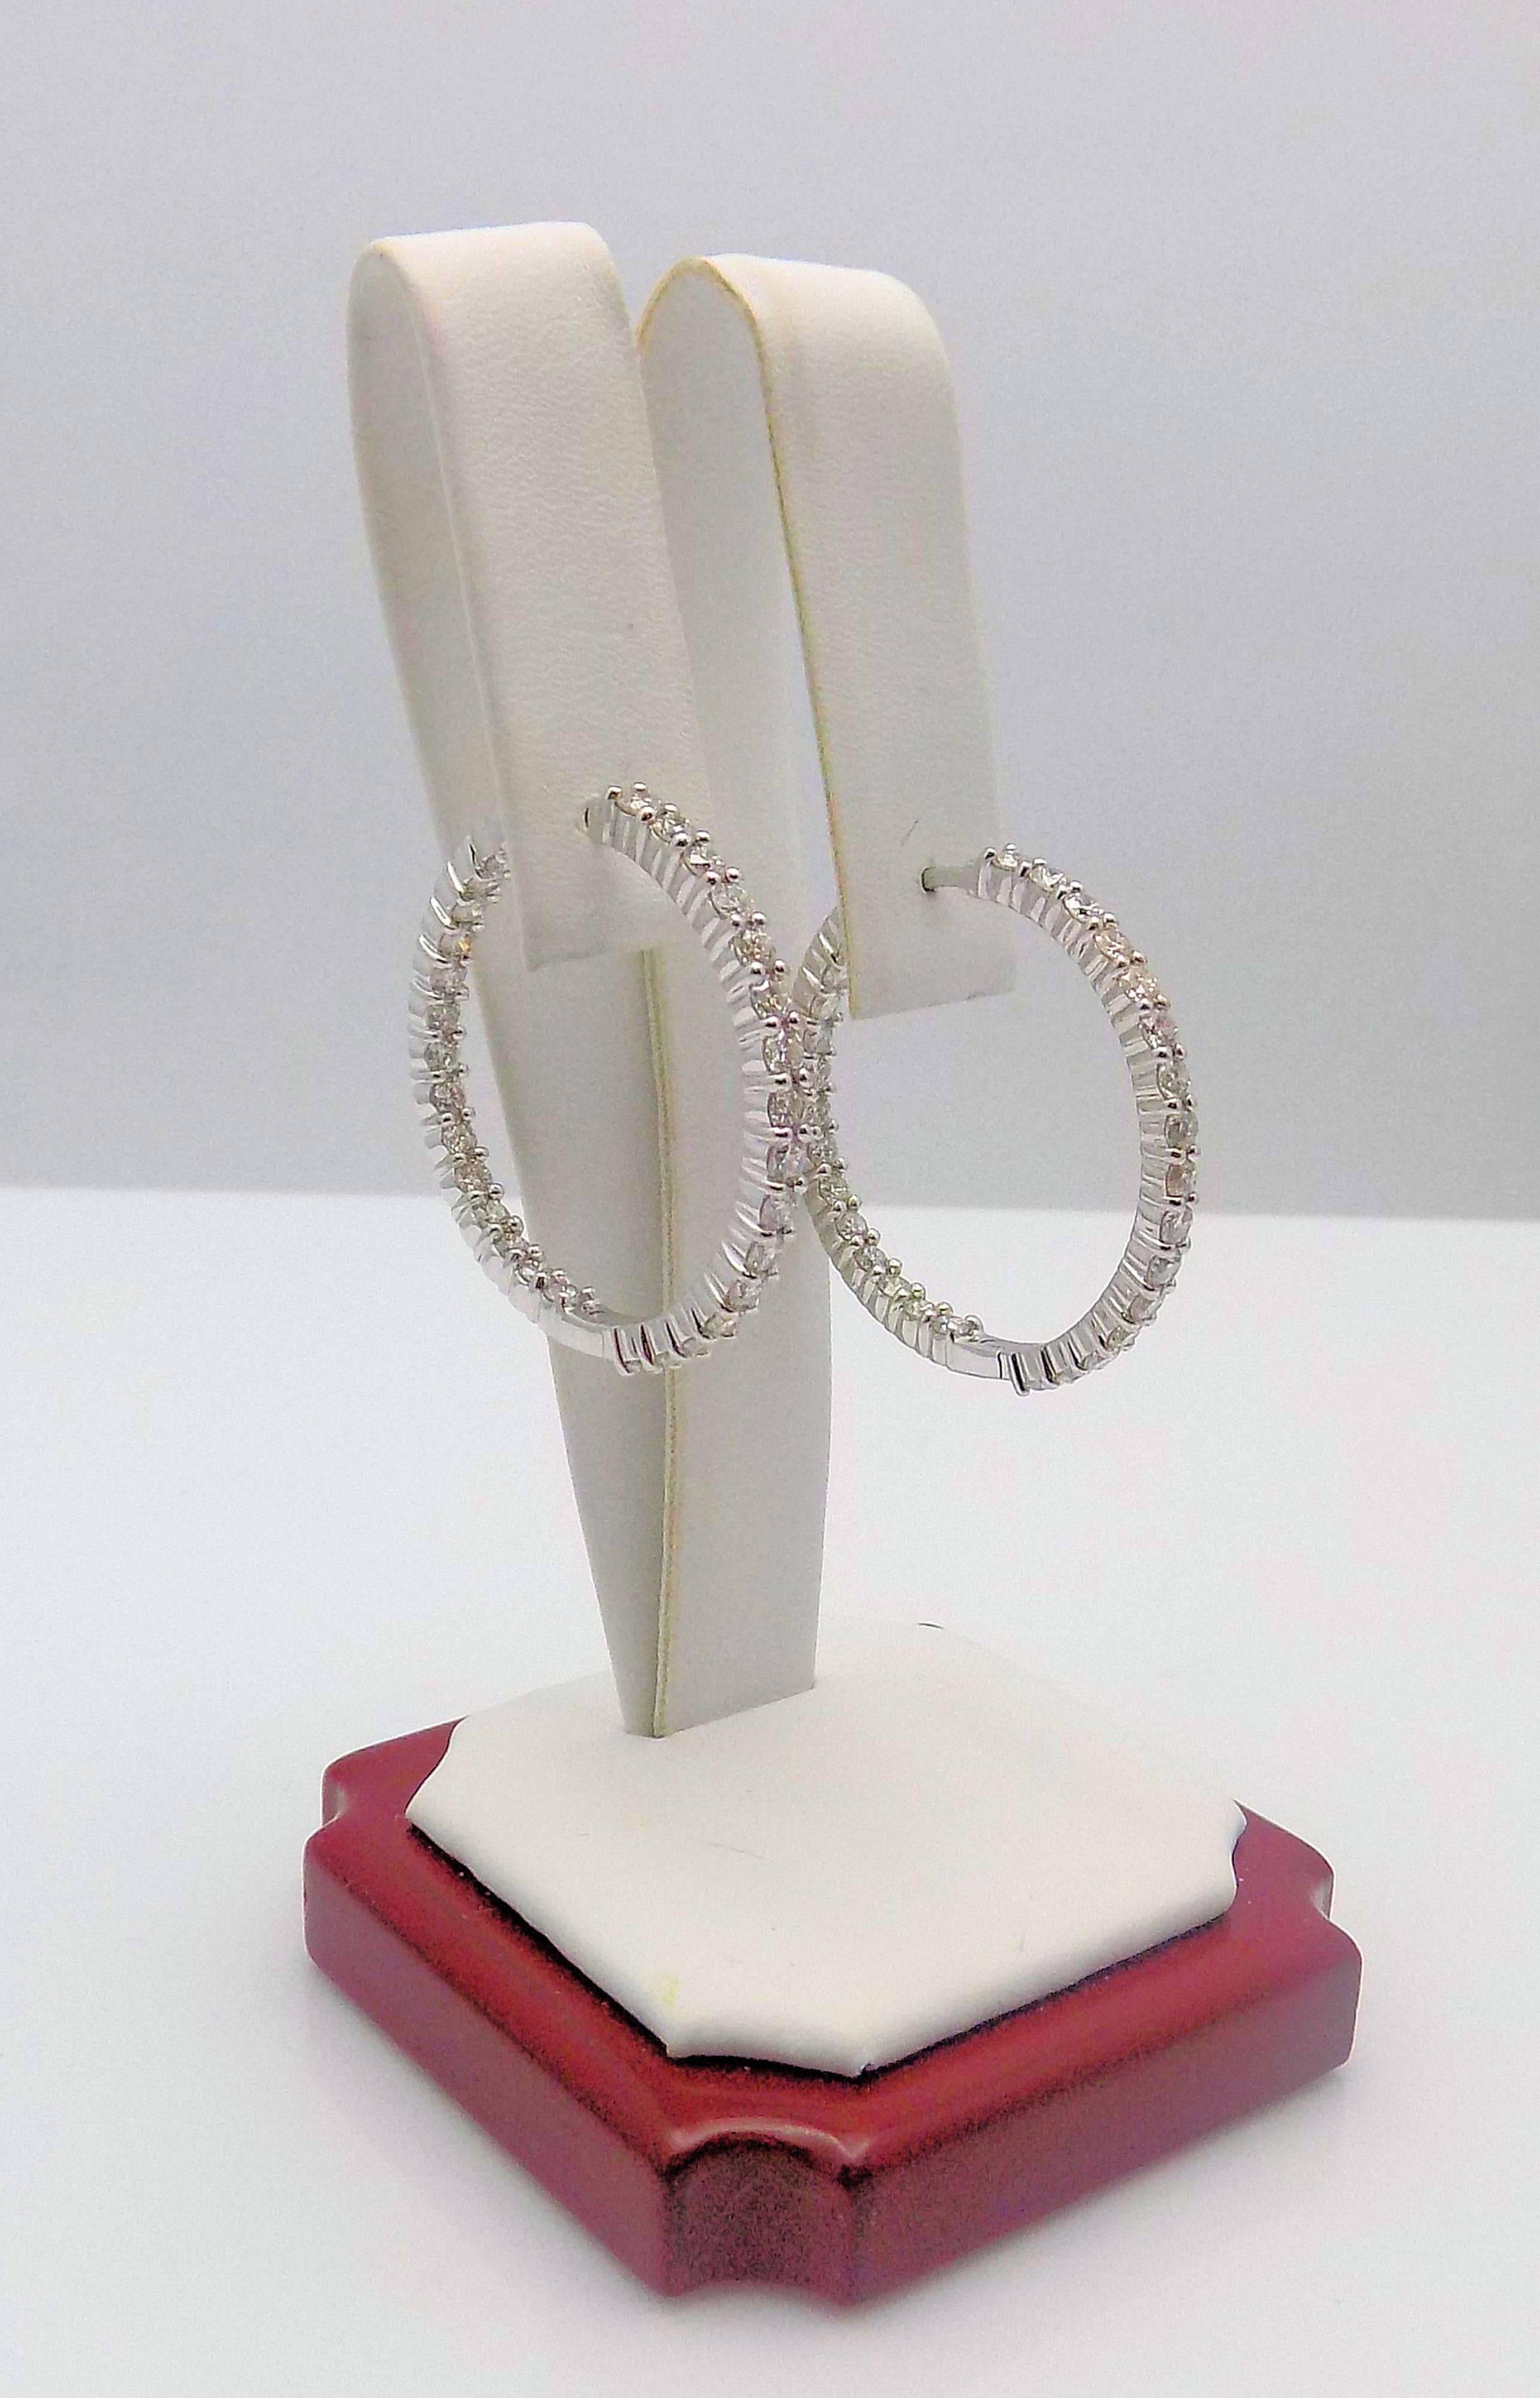 A Dazzling Pair of 18 Karat White Gold Inside-Outside Hoop Earrings 60 Round Brilliant Diamonds 3.00 Carat Total Weight; SI, H; 1.25